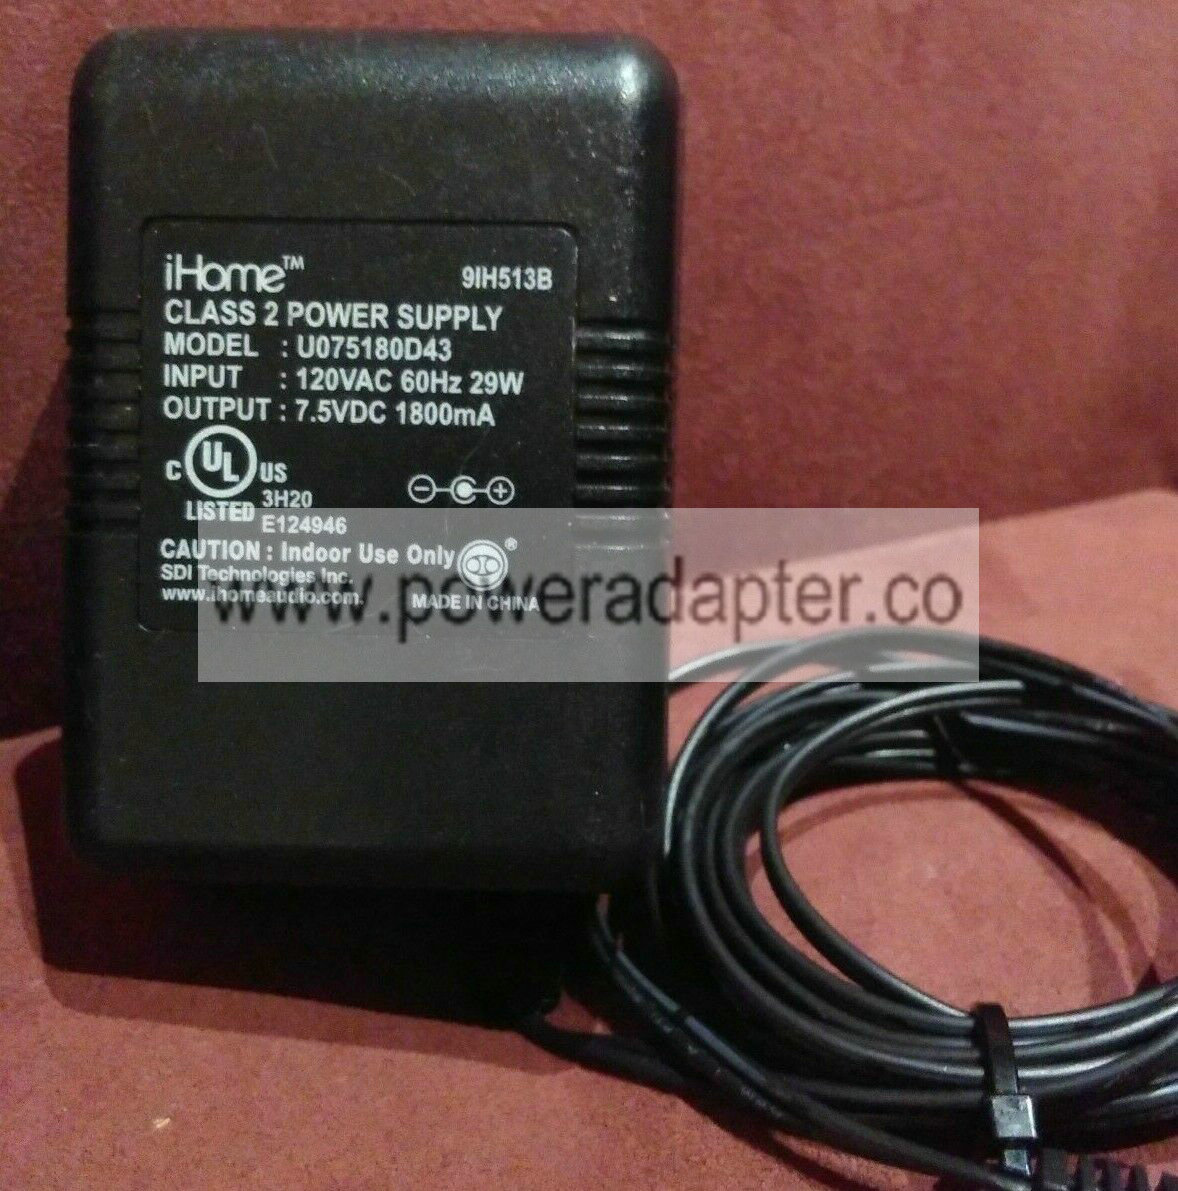 iHome Adapter U075180D43 Class 2Power Supply 7.5VDC 1800mA 91H513B AUTHENTIC NEW This is a Genuine Original iHome U0751 - Click Image to Close